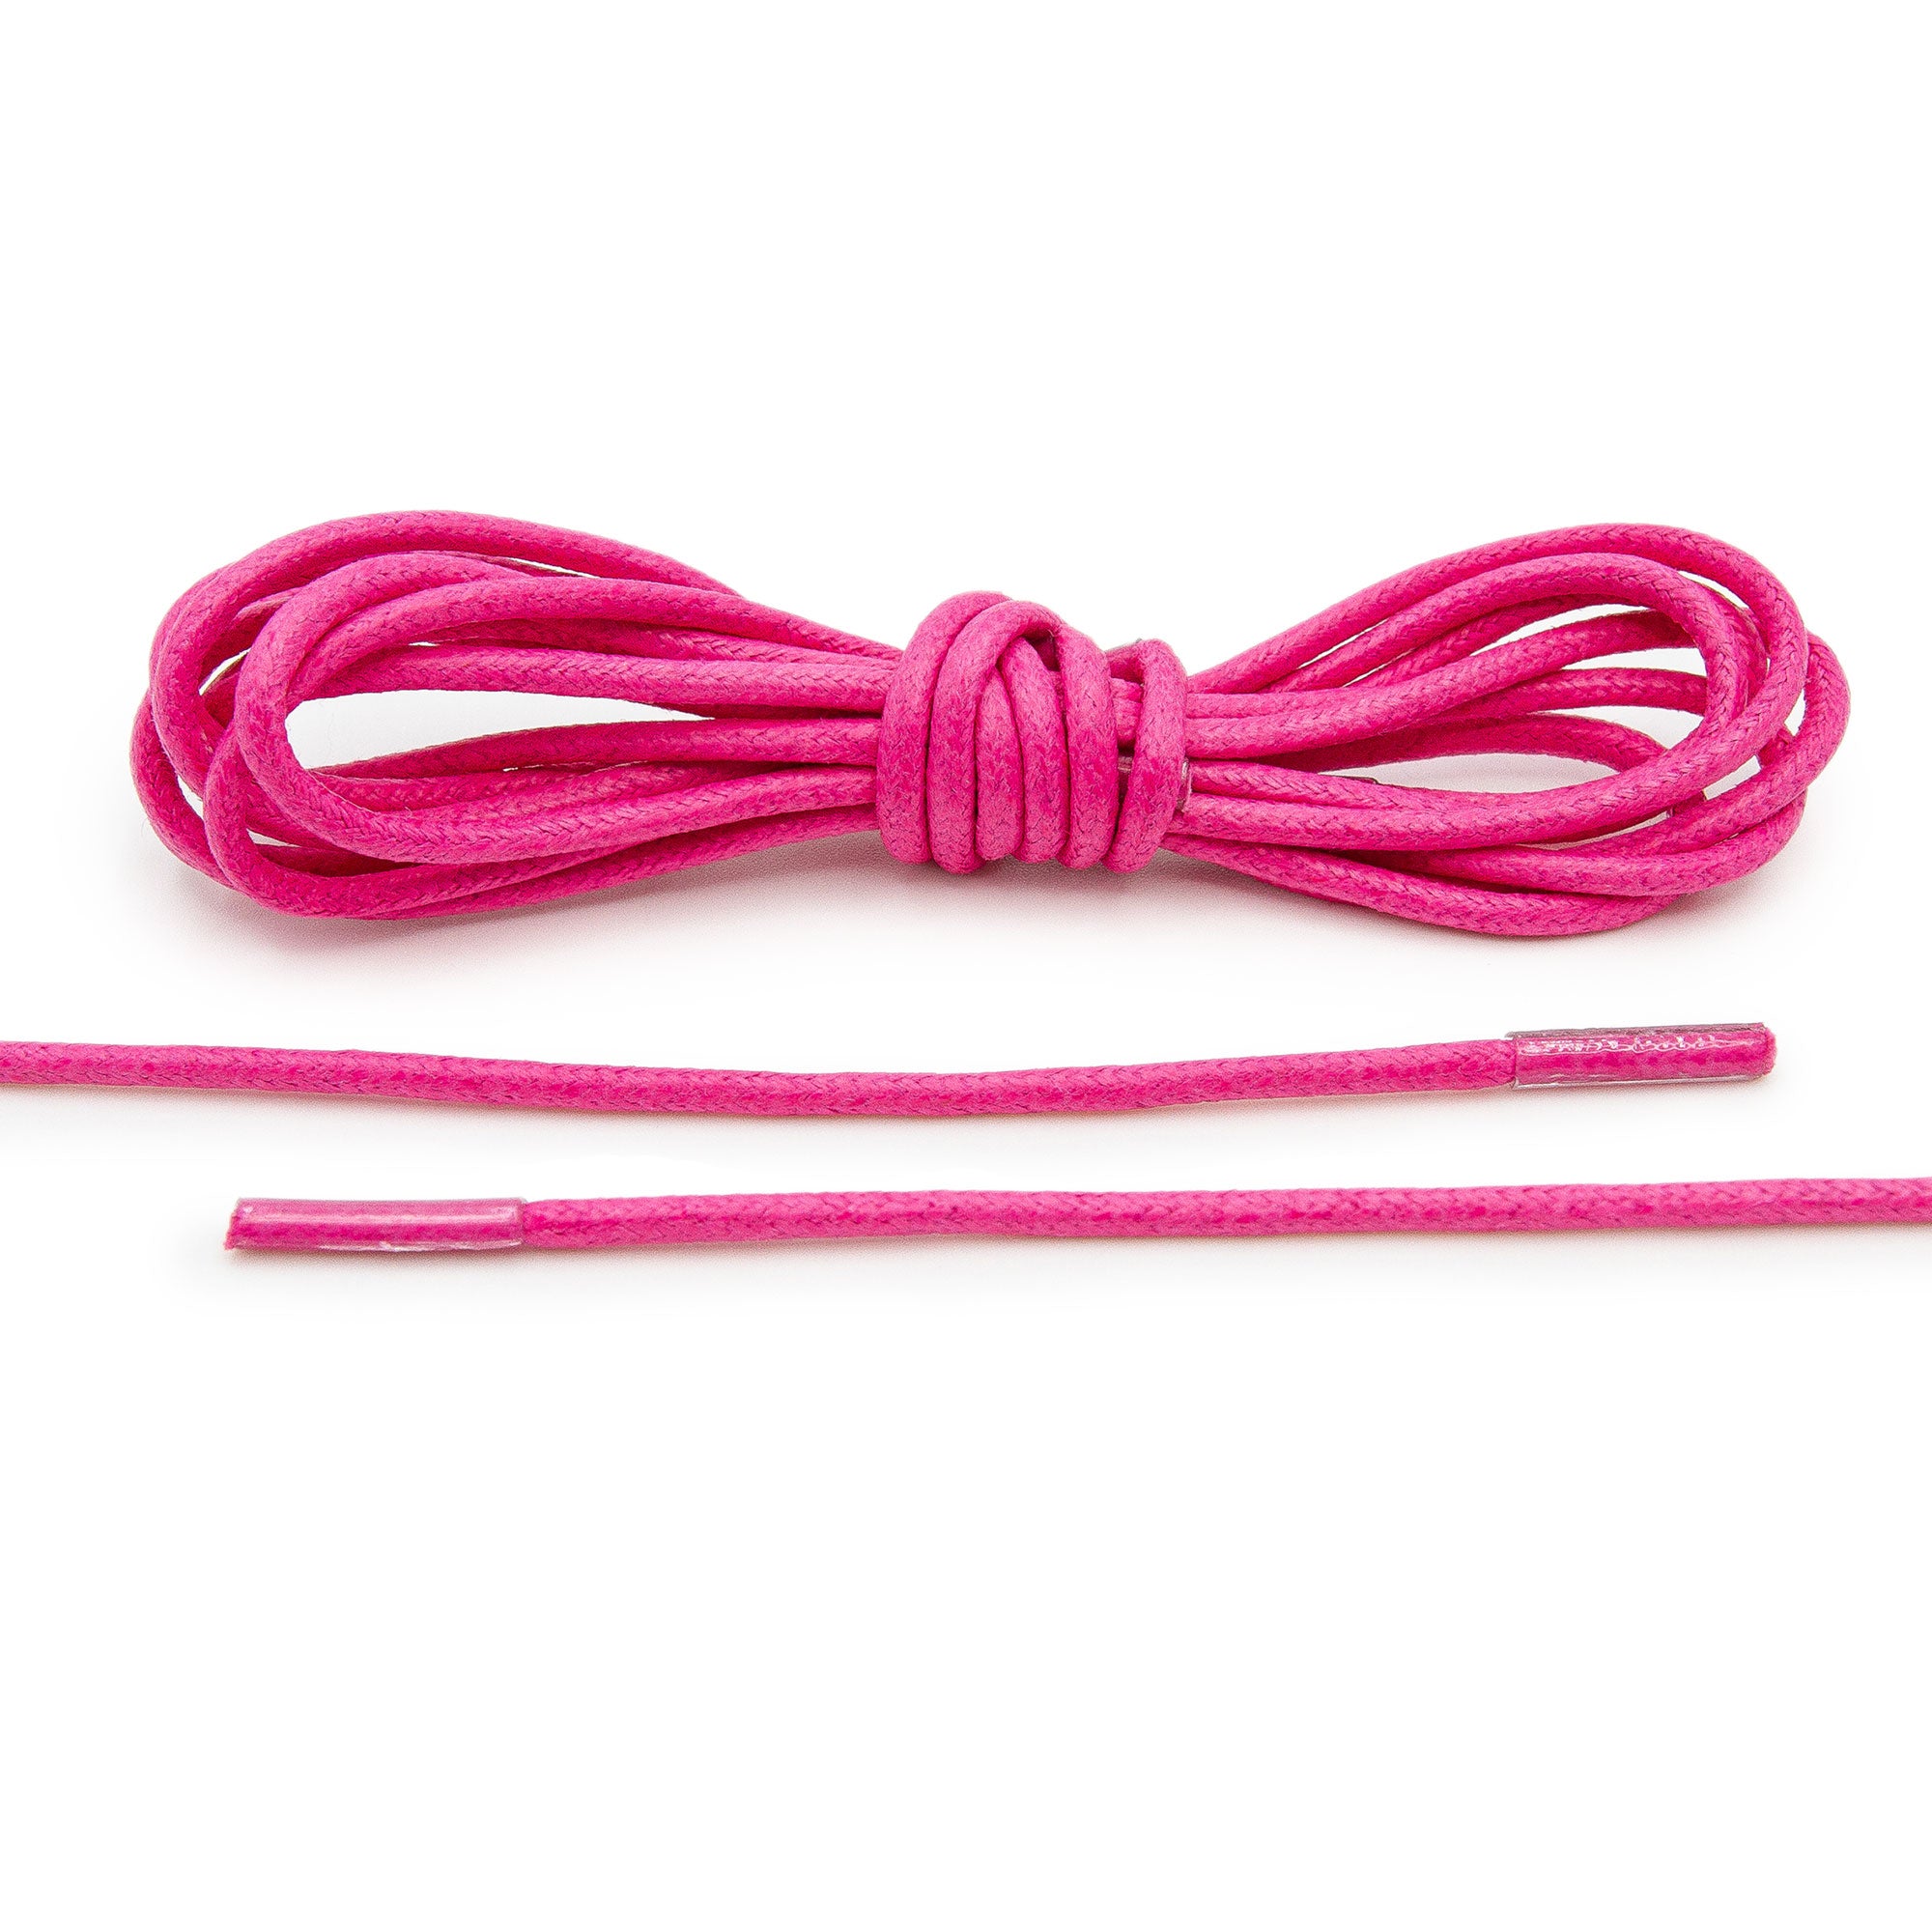 wired shoe laces In A Multitude Of Lengths And Colors 